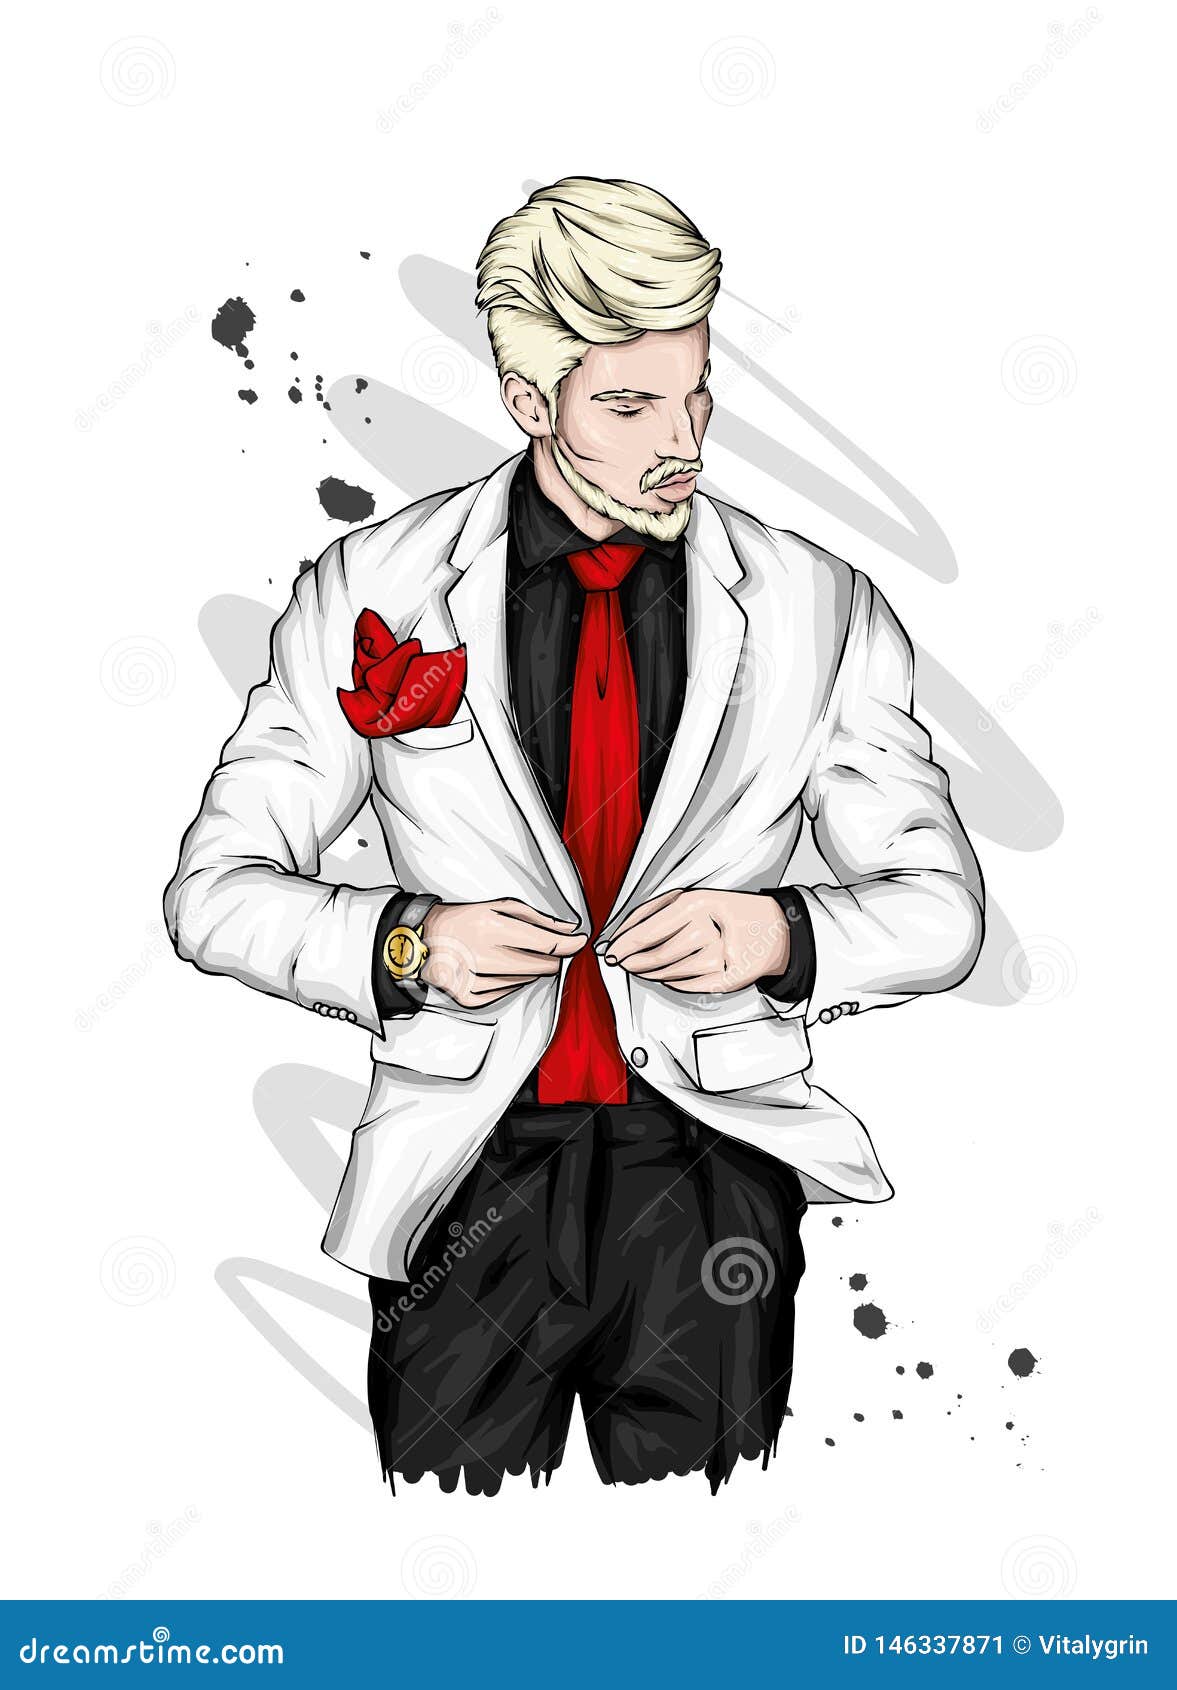 Premium Vector  A bright and stylish illustration of a man